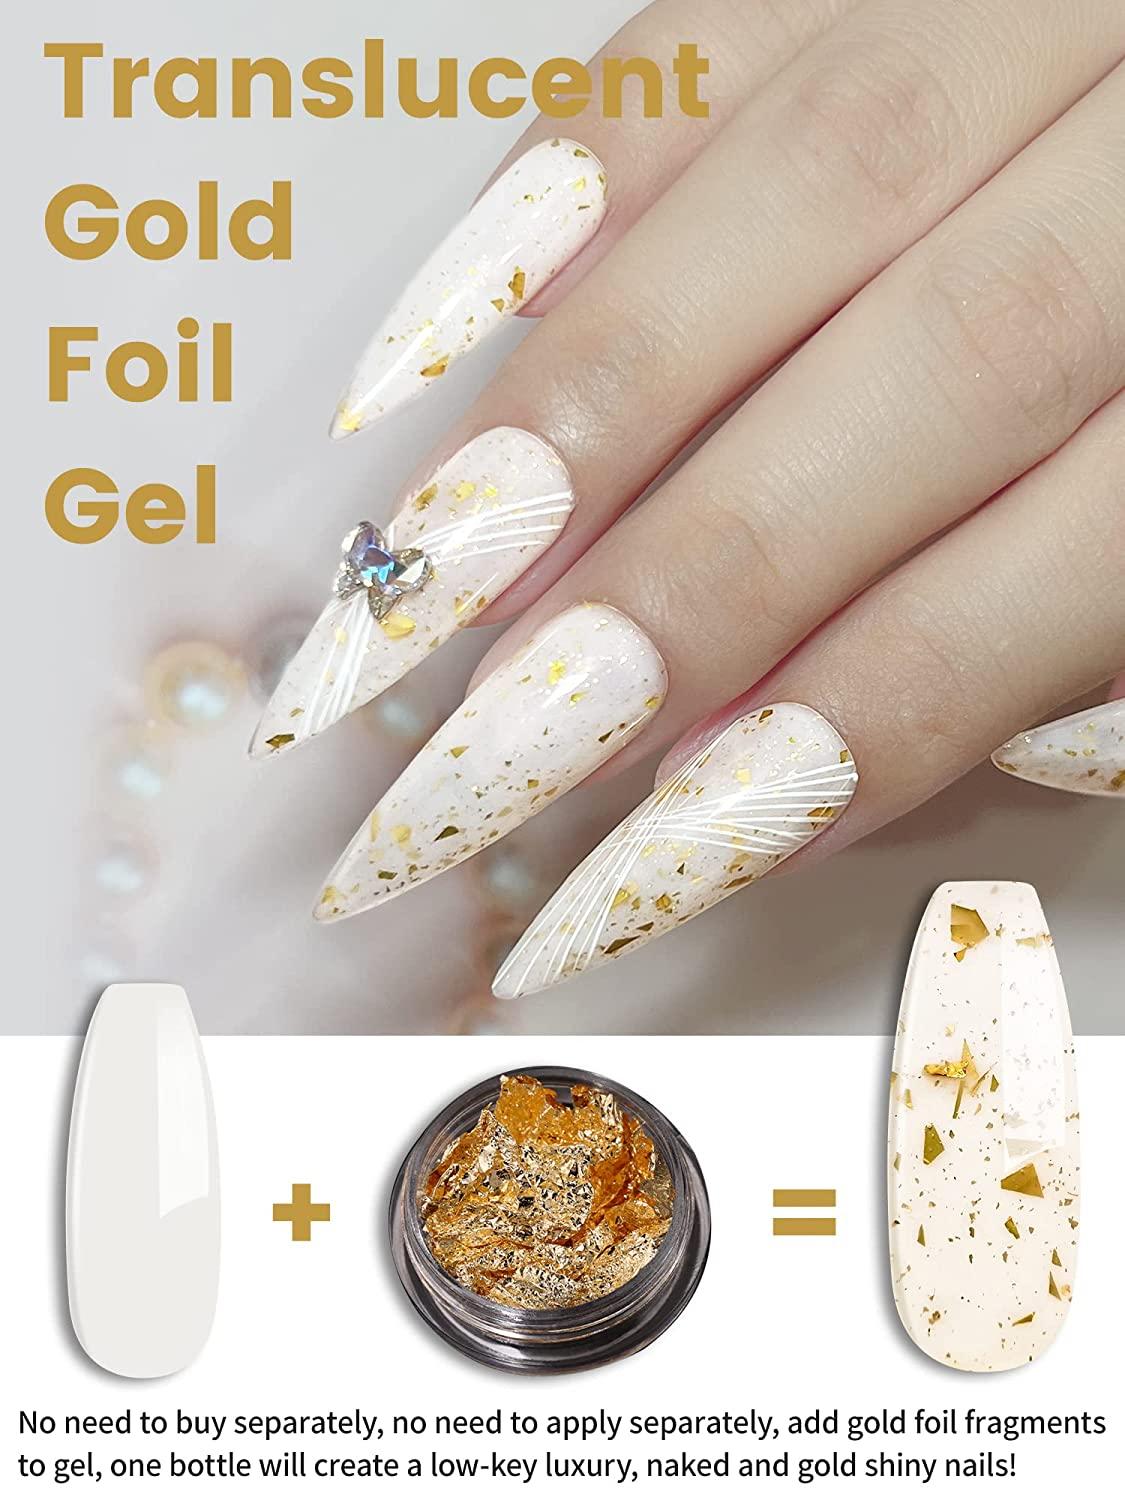 Frankening: How to suspend glitter in clear nail polish? | From head to foot